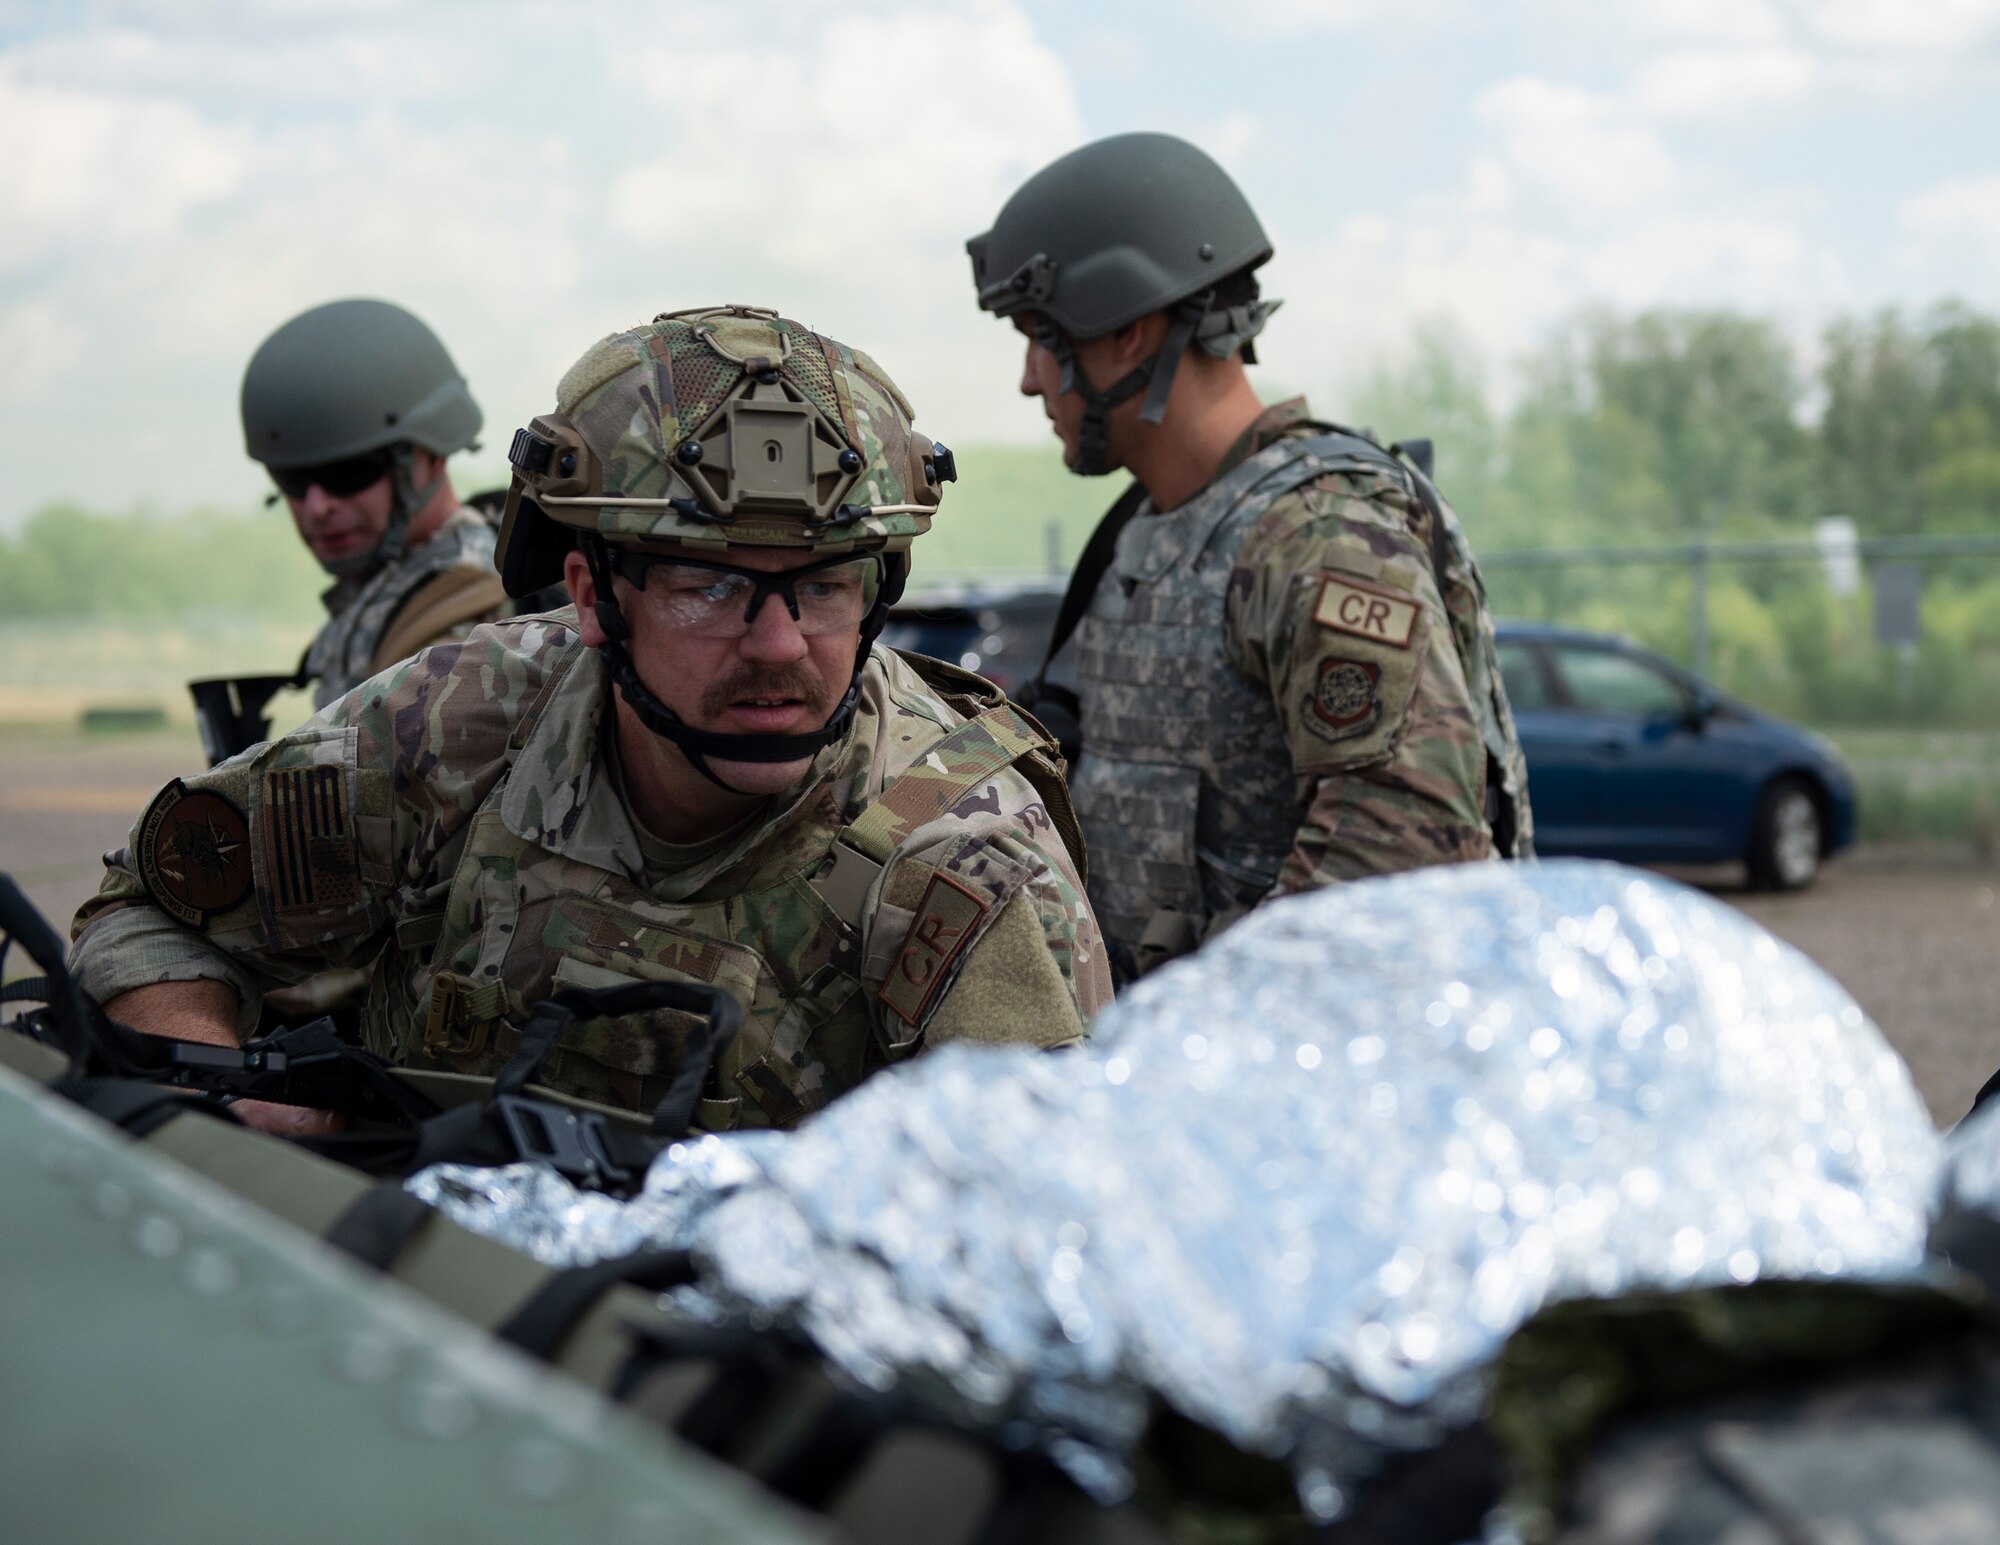 U.S. Air Force Tech. Sgt. Jeff Allen, center, 146th Contingency Response Flight, California Air National Guard, prepares to close the tailgate of a HUMVEE in Rosemount, Minn., July 27, 2022.